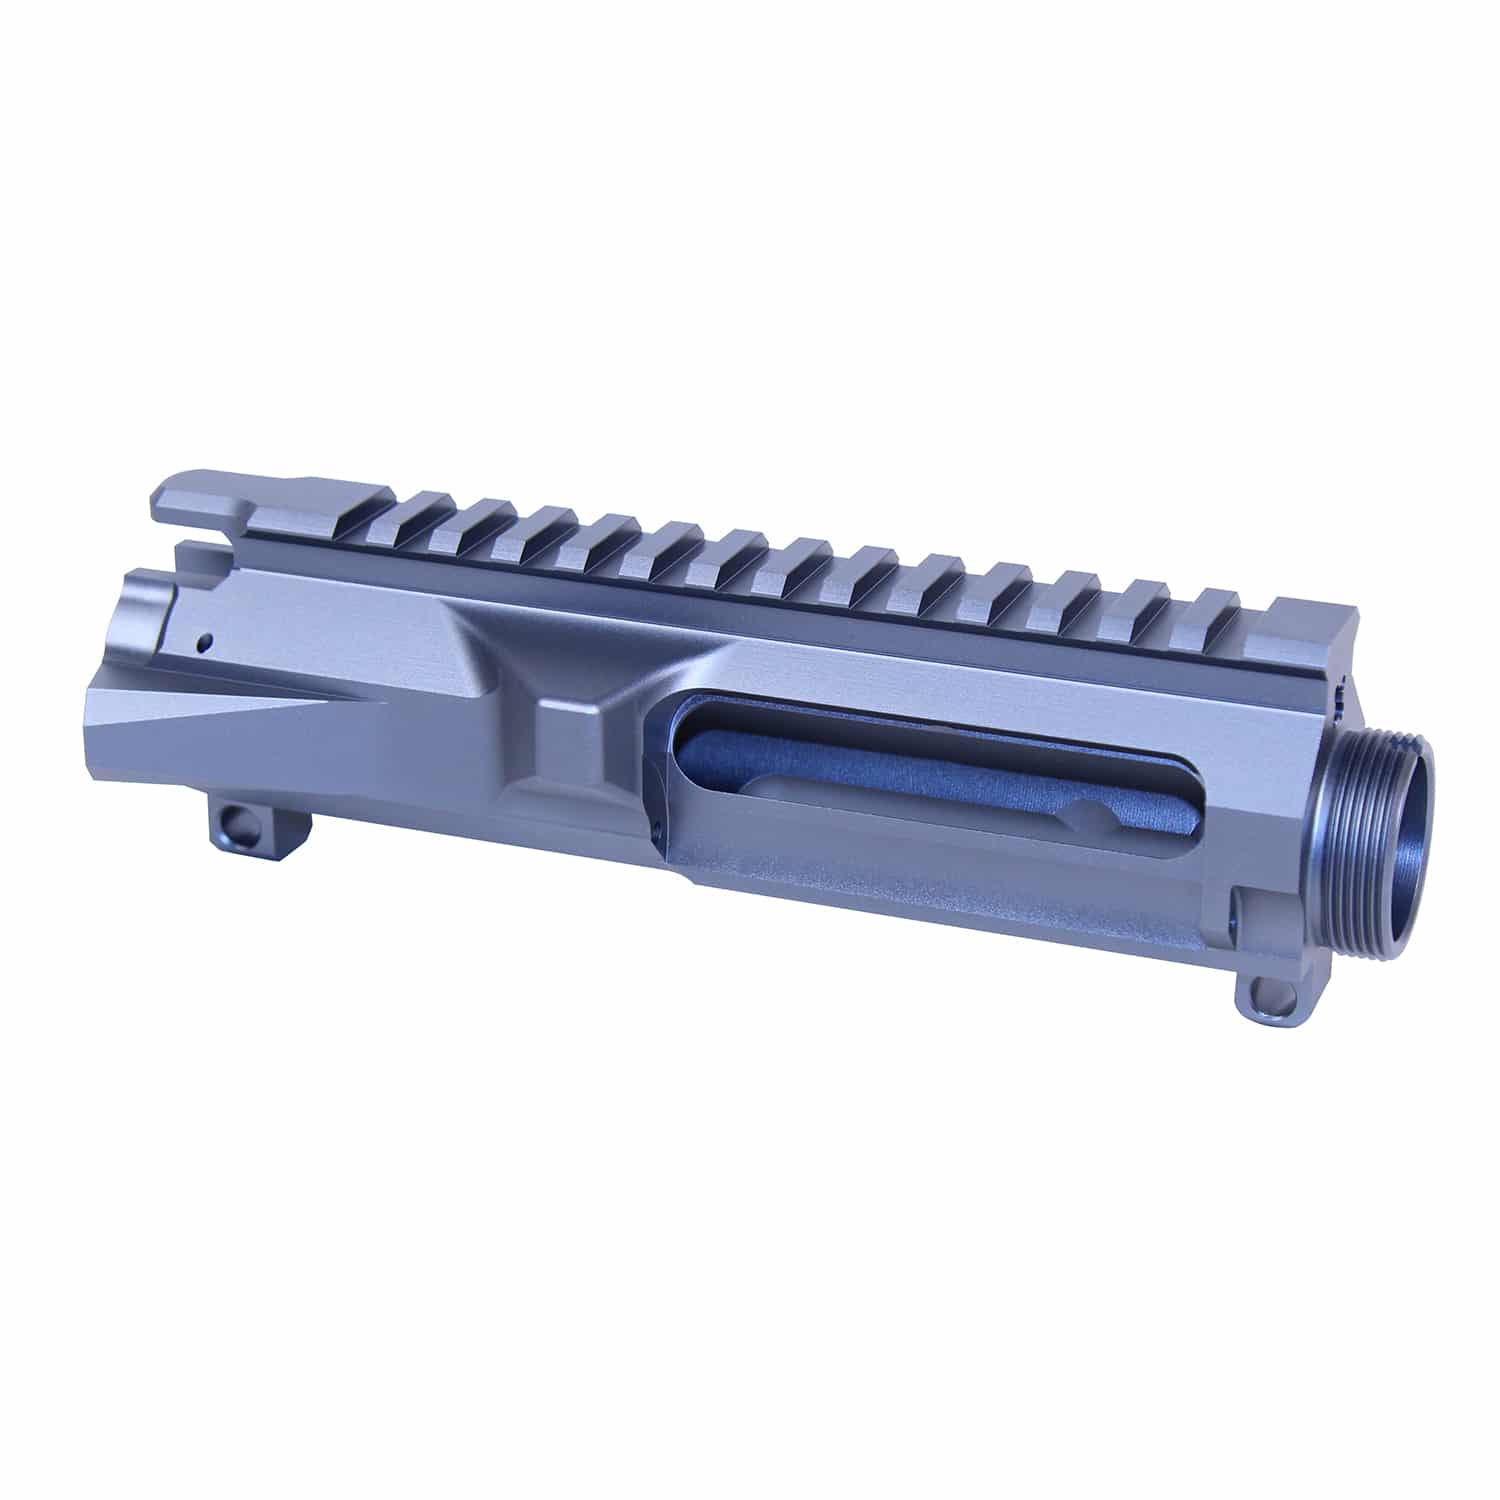 AR-15 M4 Stripped Billet Upper Receiver in Anodized Grey